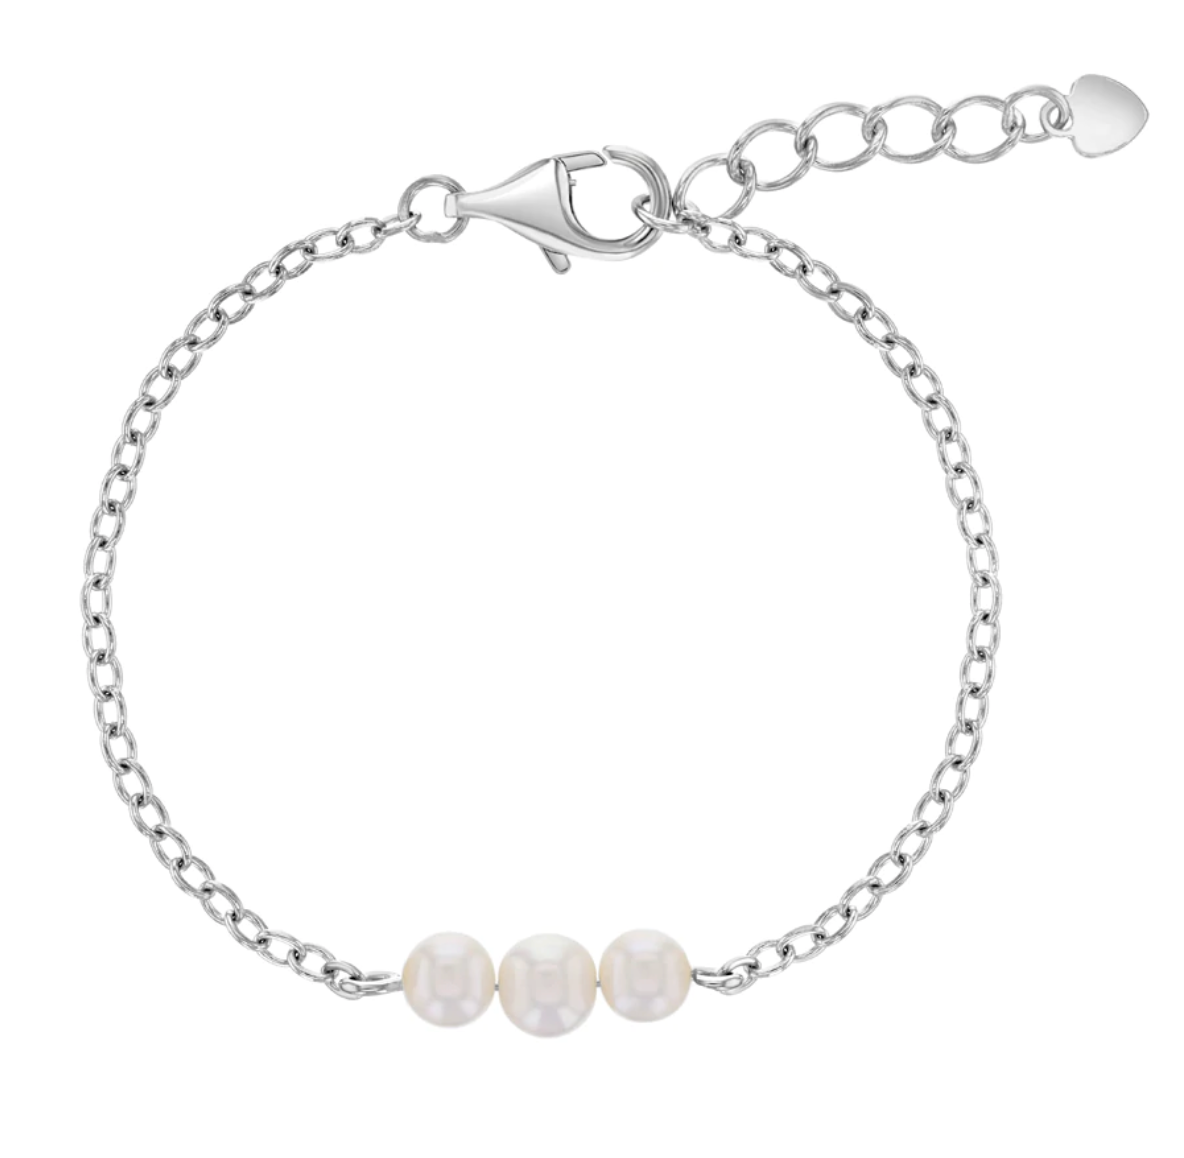 925 Sterling Silver Simulated Pearl Adjustable Bracelet For Baby Girls To Teens - 4.5